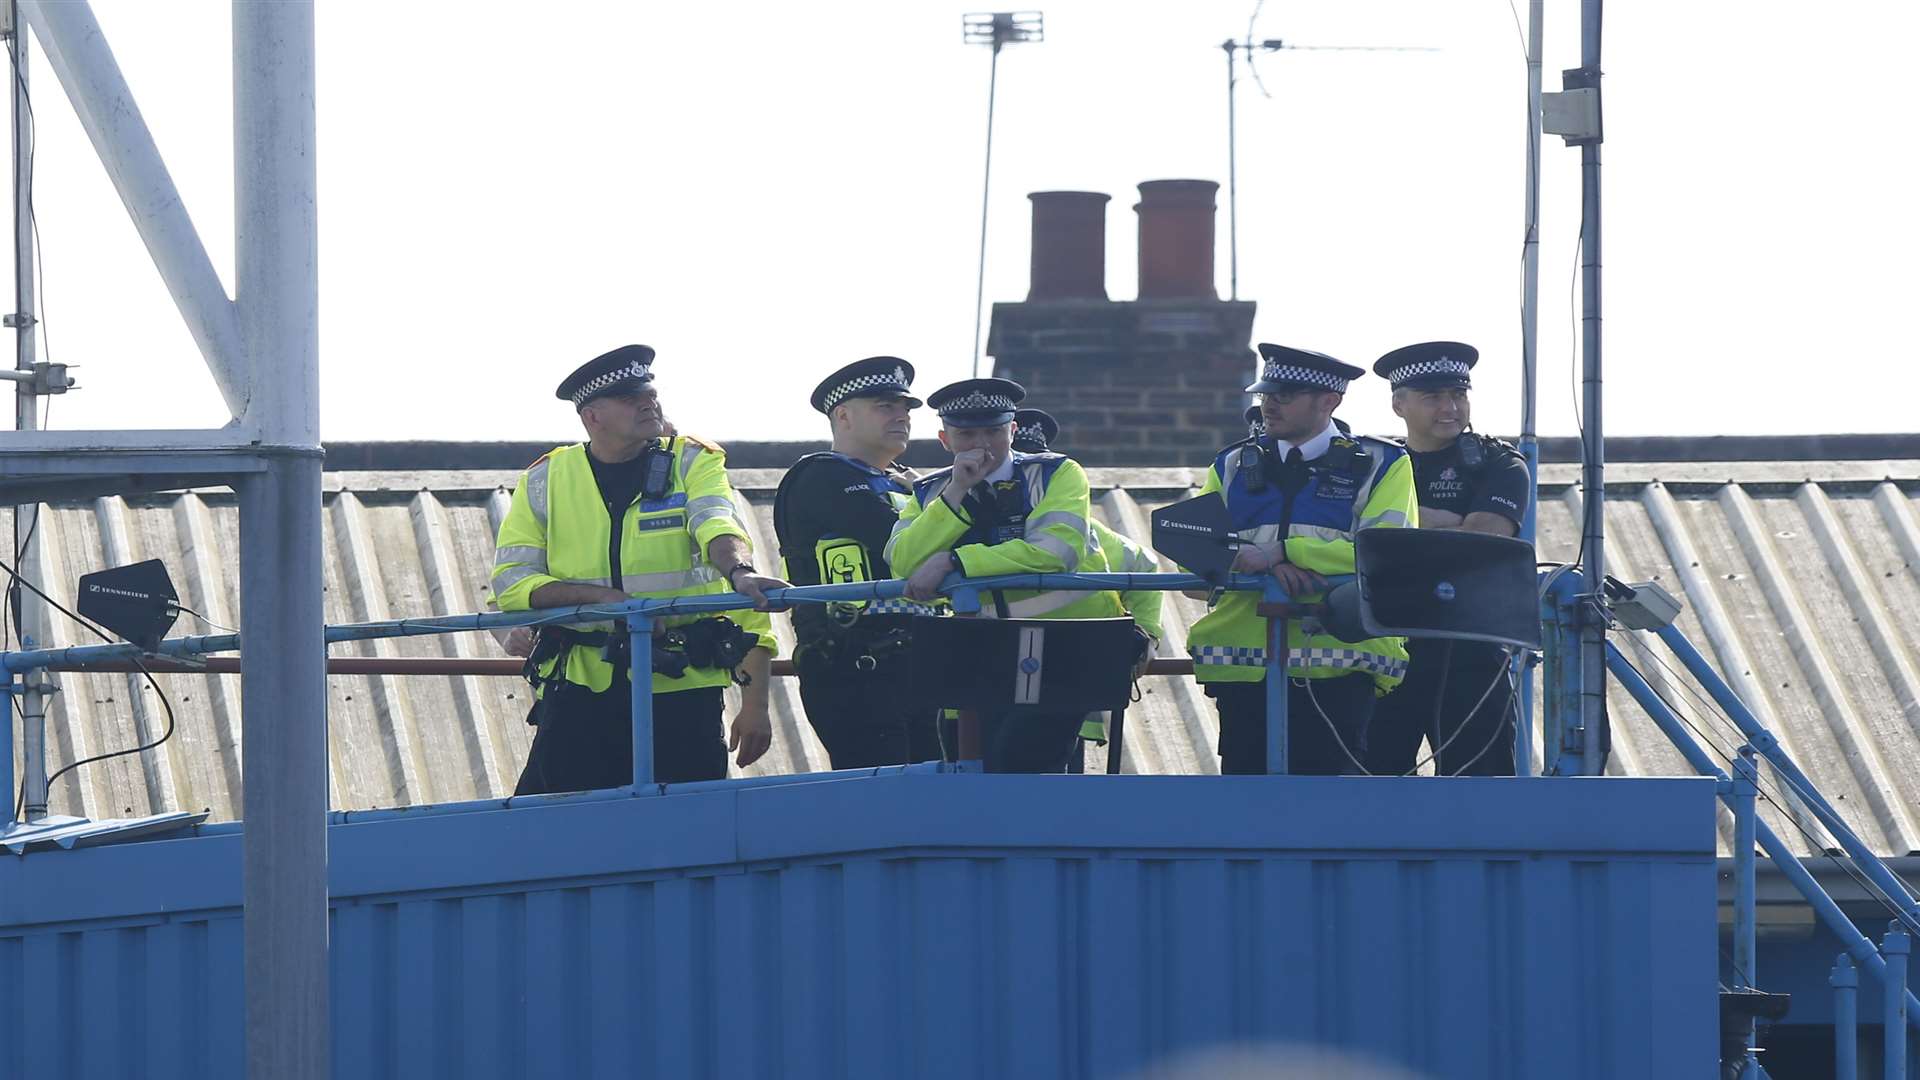 There was a heavy police presence at Priestfield Stadium